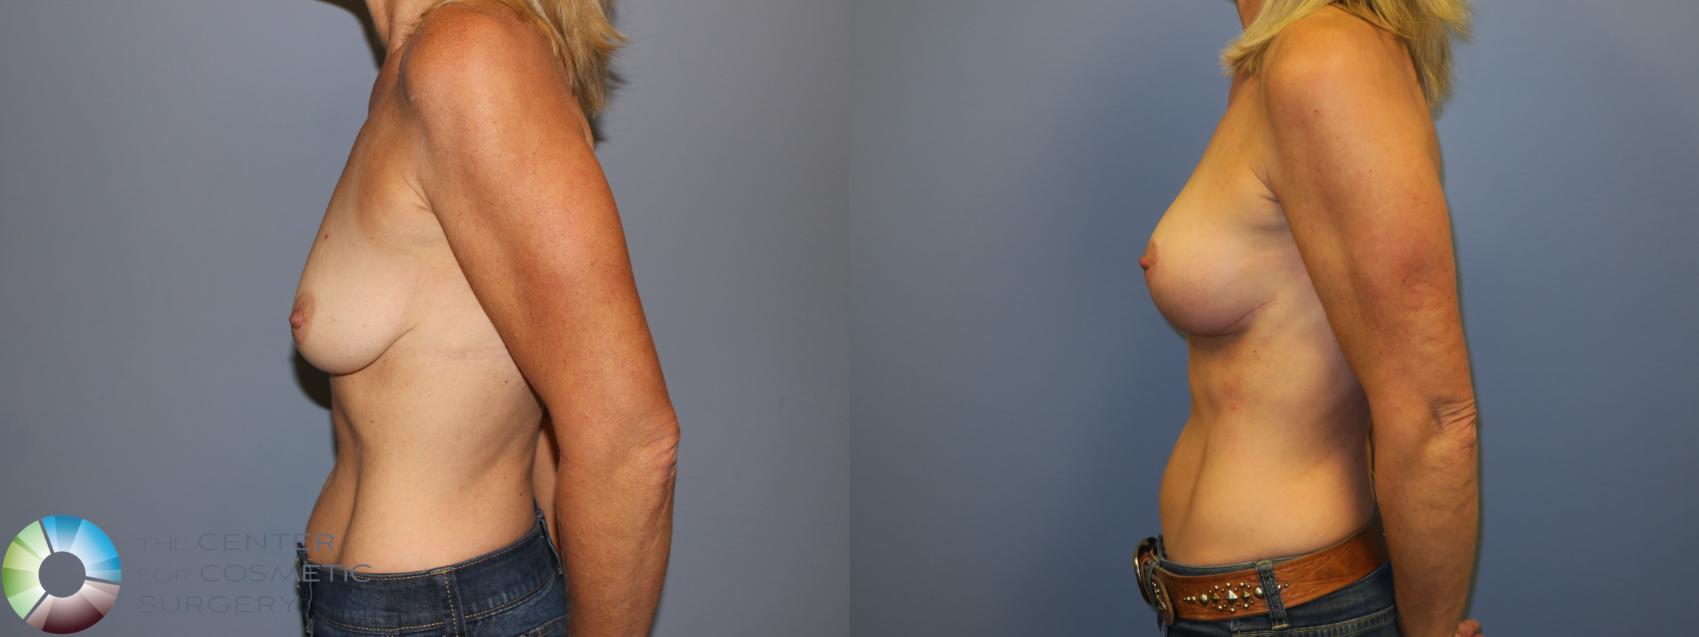 Before & After Breast Lift Case 11517 Left Side View in Golden, CO